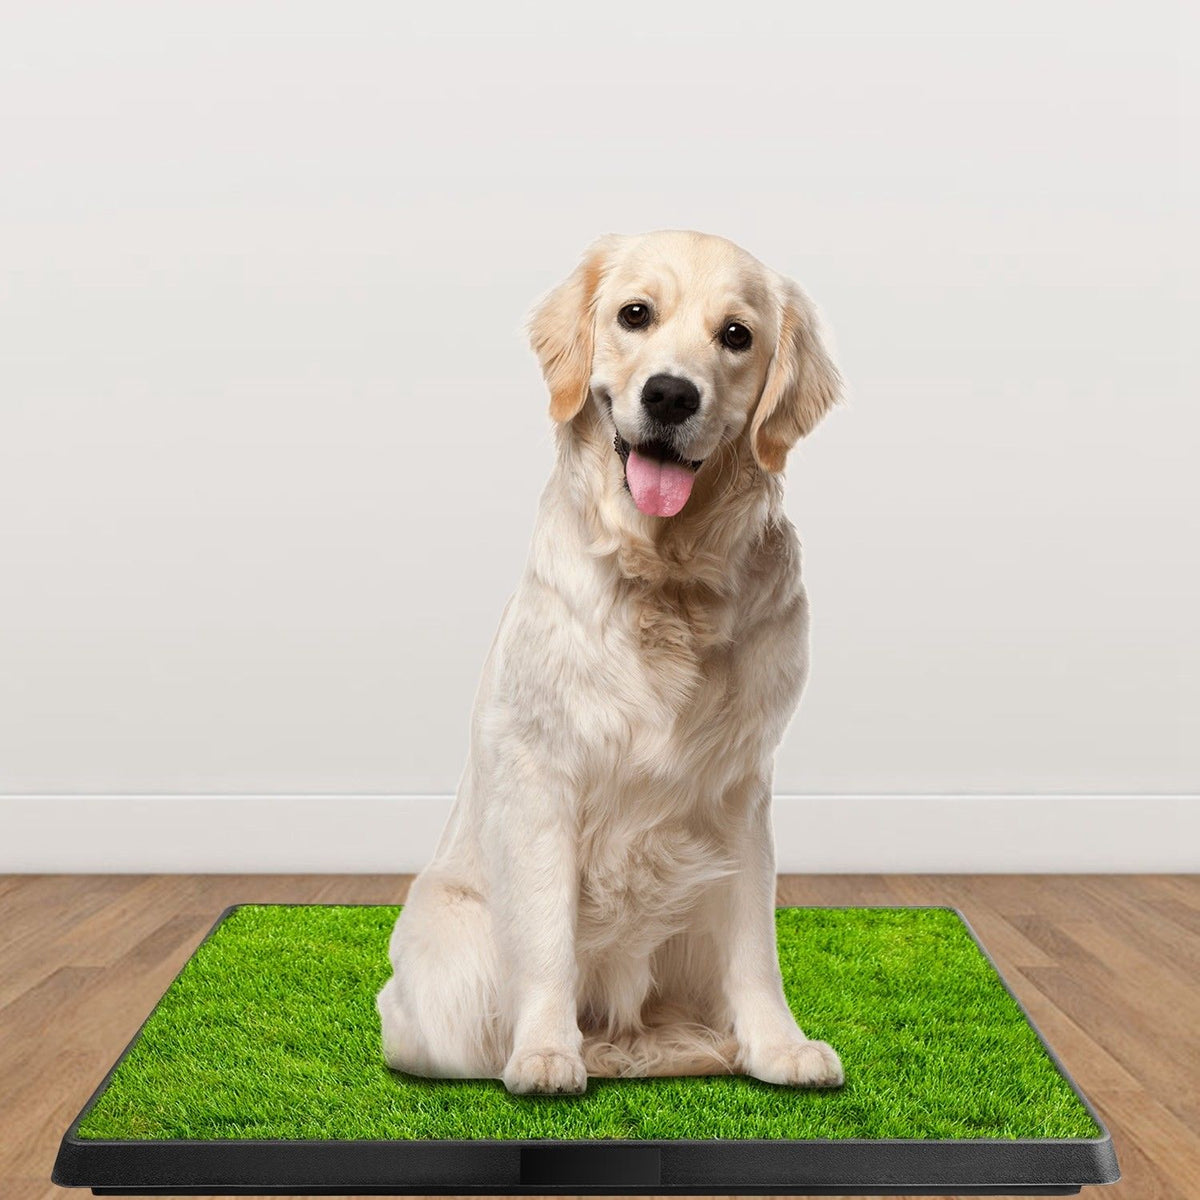 Pet Toilet Trainer Grass Mat for Puppy Potty Training - Main Image 9